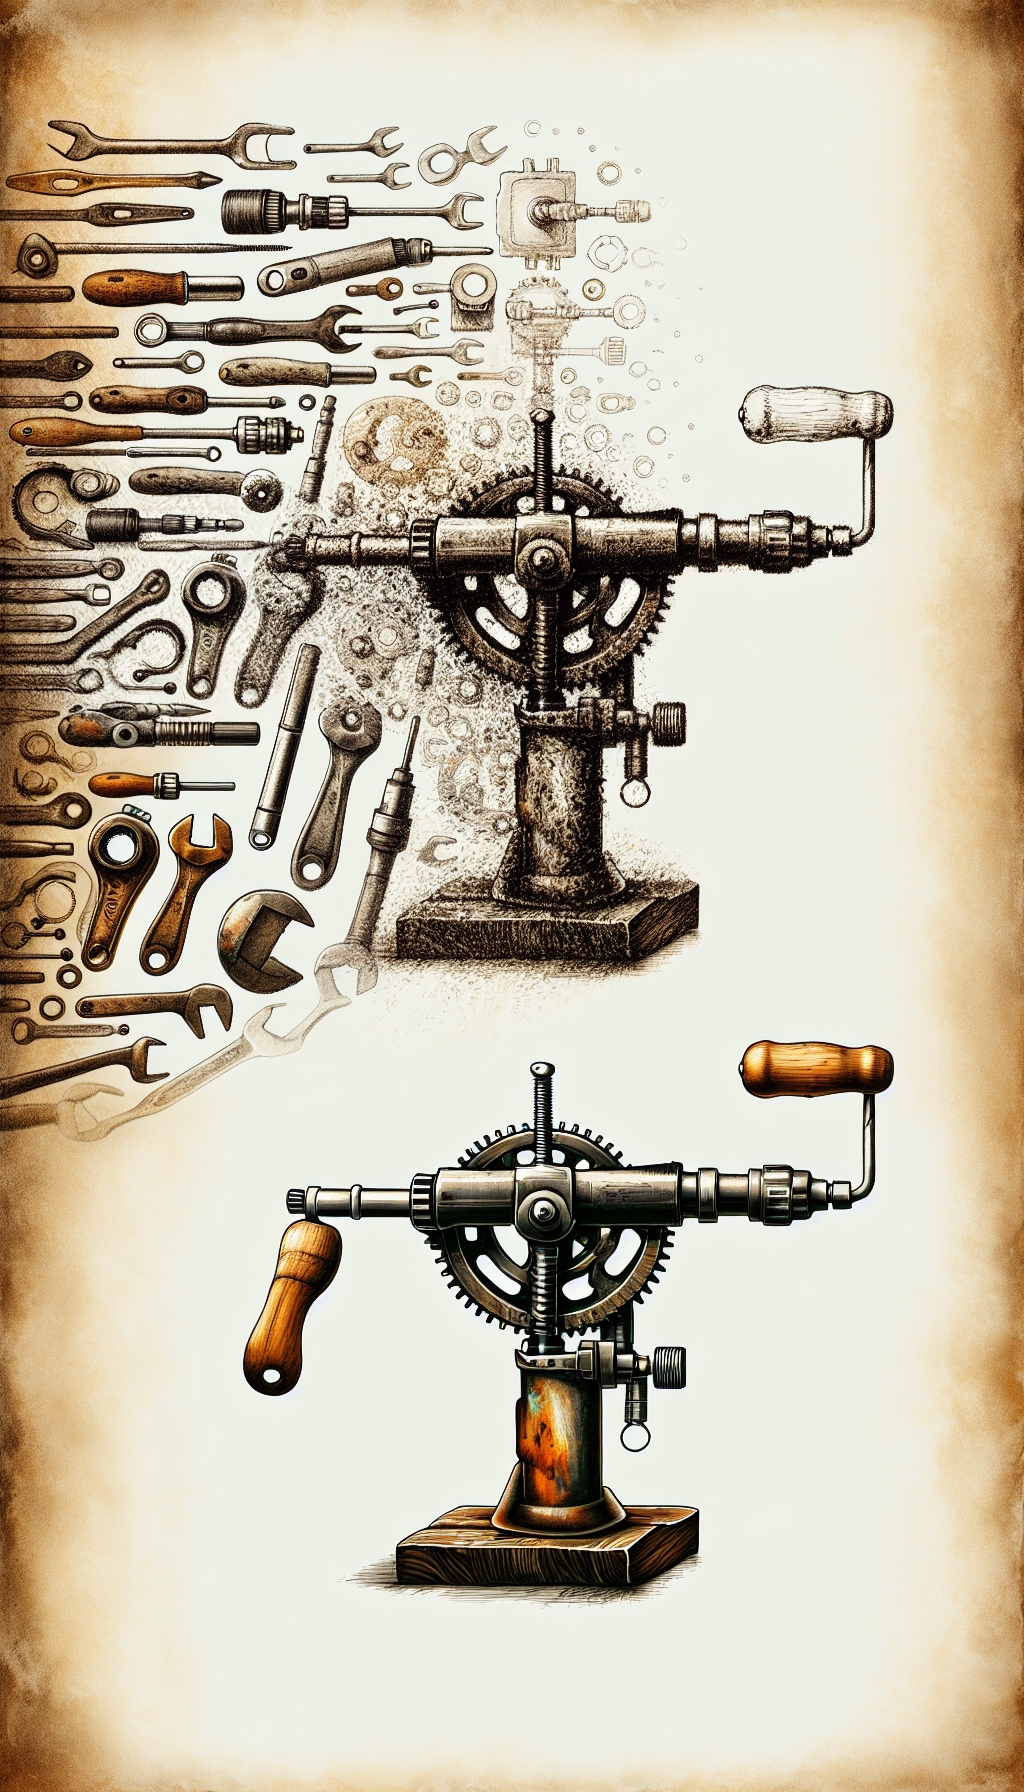 An illustration portrays an old, rusted hand-crank drill gradually transforming into a gleaming, new version of itself. In the background, stylized, ghostly outlines of various obscure antique tools serve as a visual guidebook for identification. The image transitions from a gritty sepia sketch on the rusty side to a vibrant, digital watercolor on the restored side, signifying renewal and discovery.